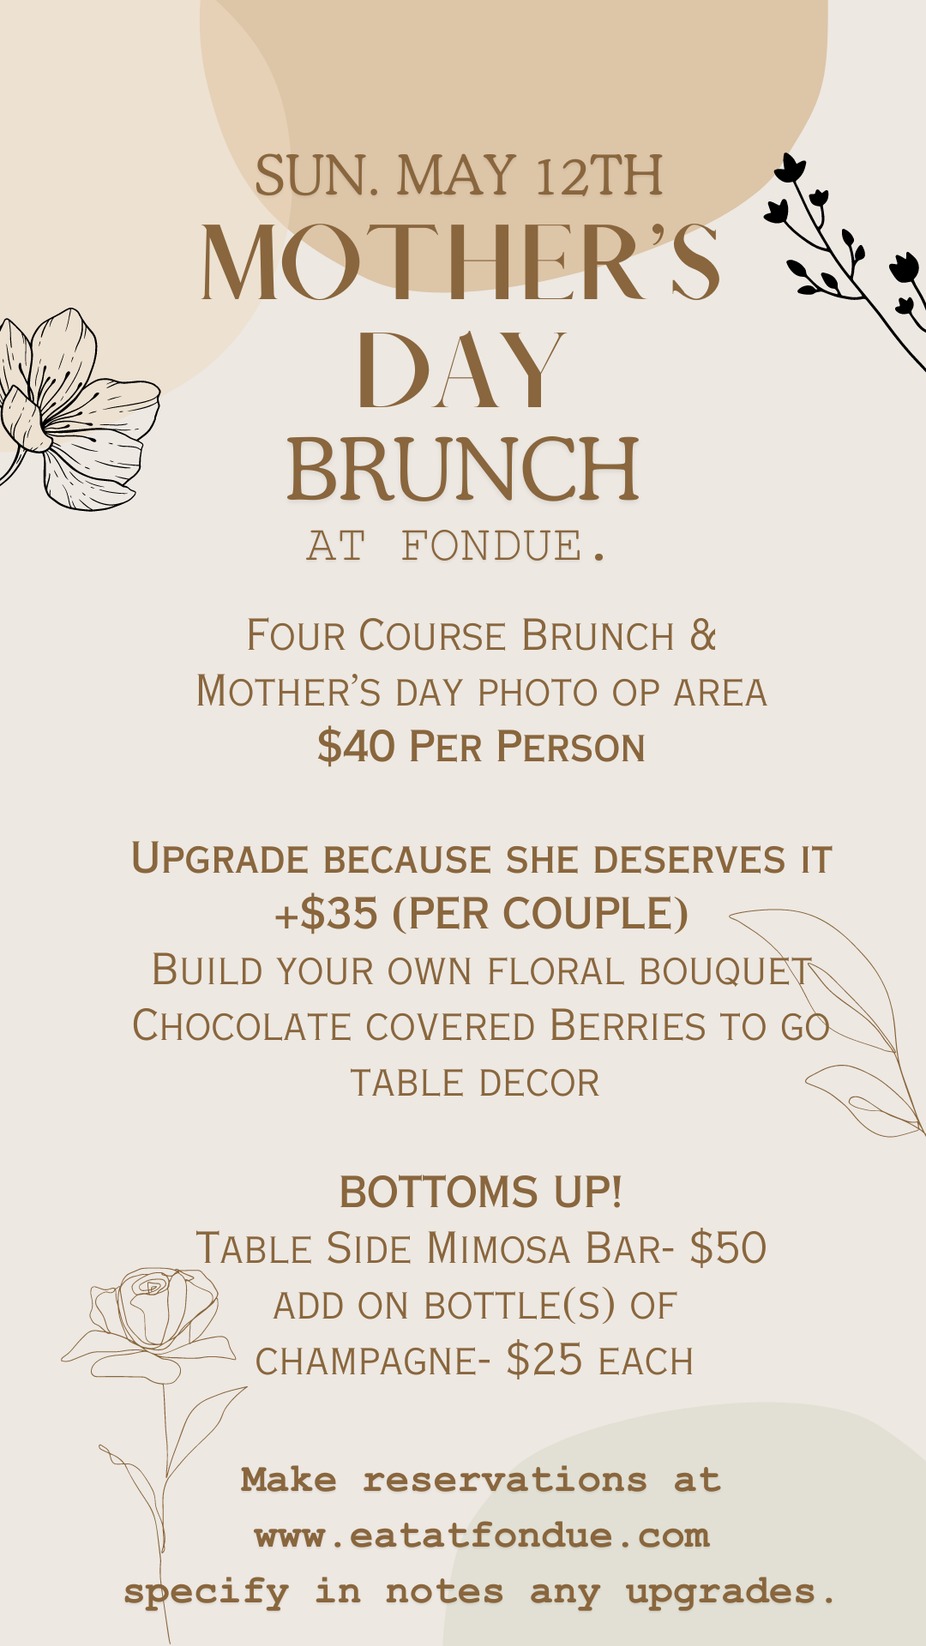 Fondue. Mother's Day Brunch event photo